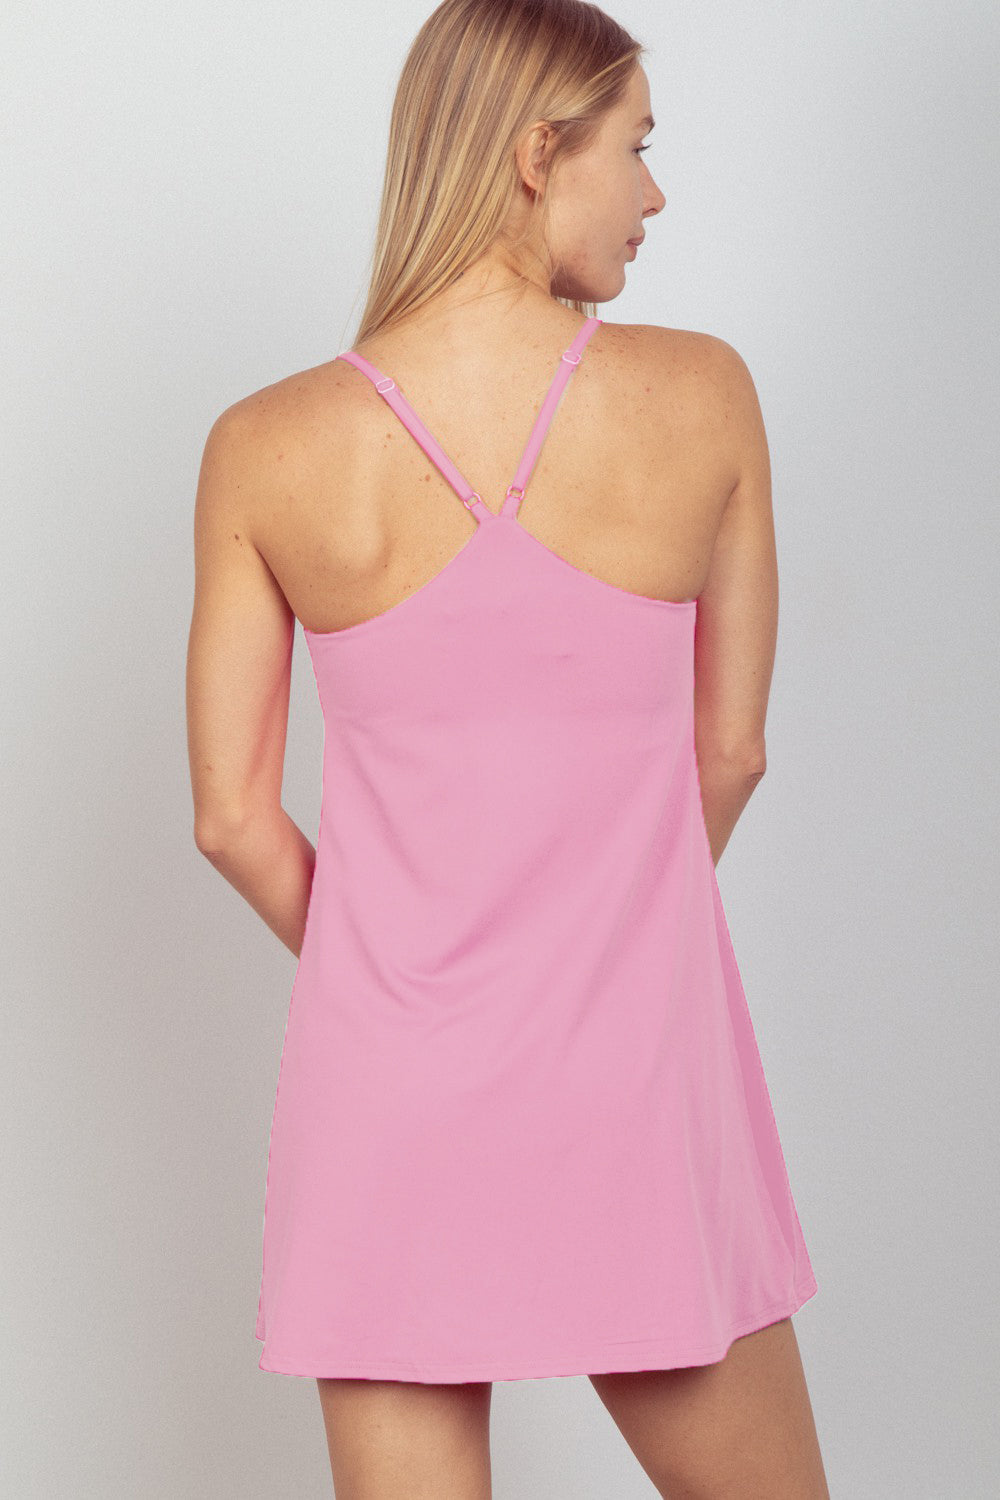 The sleeveless active tennis dress features a sleek design and a unitard liner for added comfort and support. It is perfect for rigorous tennis matches or training sessions. The unitard liner provides coverage and helps keep you feeling secure during movement. S-L